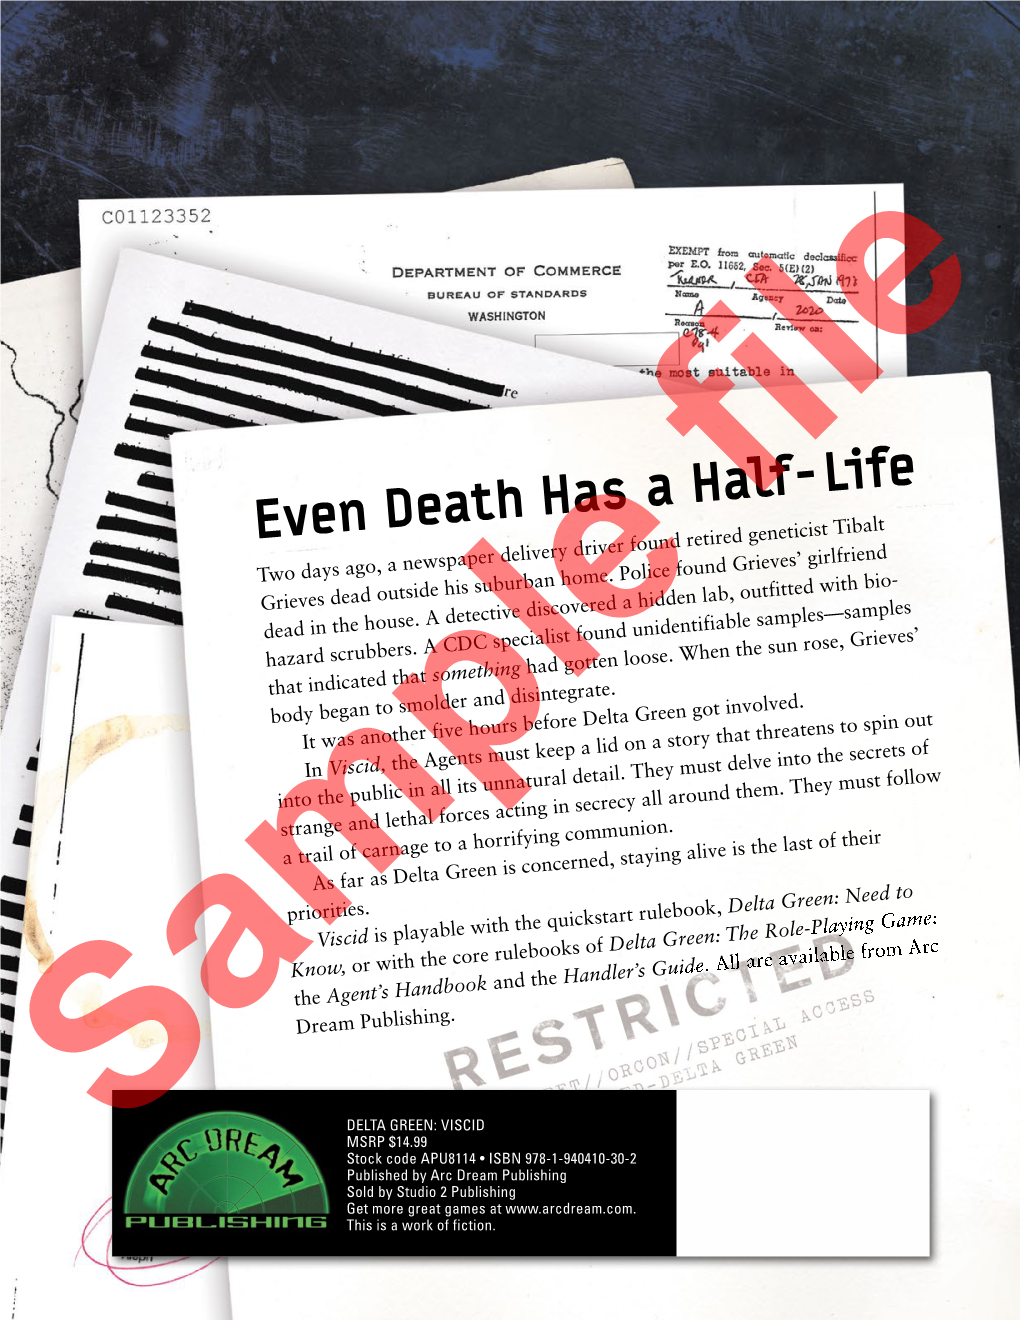 Even Death Has a Half-Life Two Days Ago, a Newspaper Delivery Driver Found Retired Geneticist Tibalt Grieves Dead Outside His Suburban Home